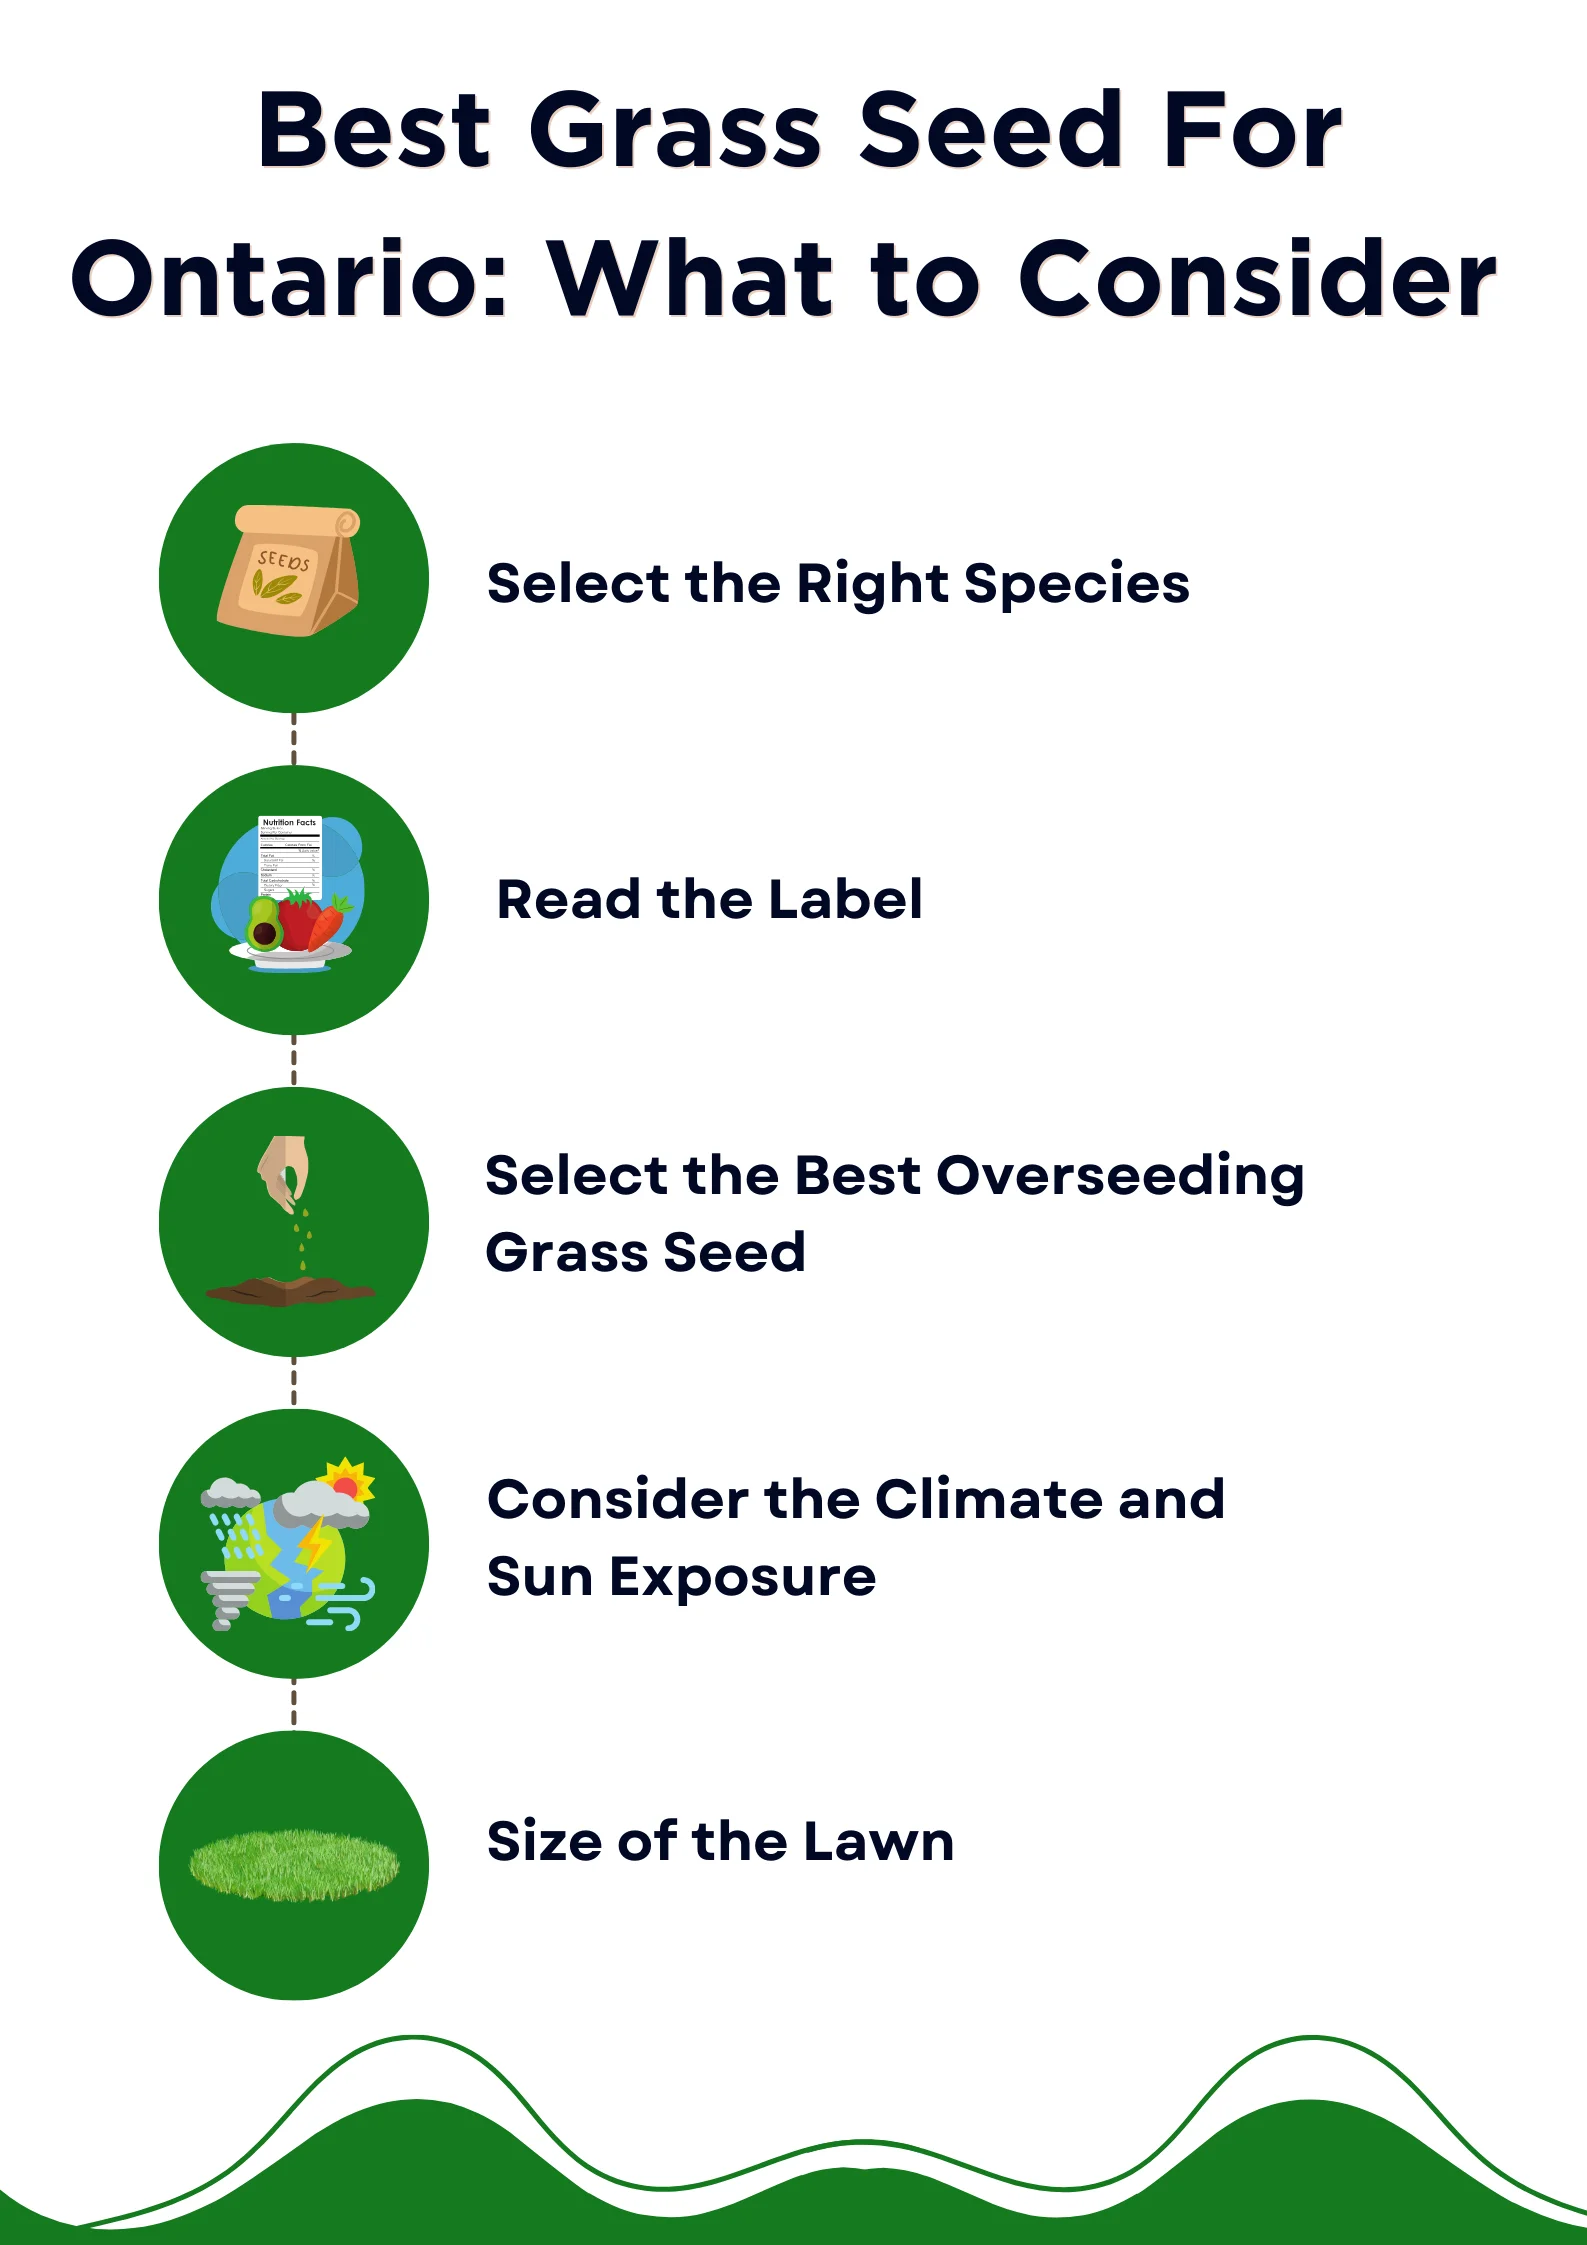 An infographic on the considerations for the best grass seed for Ontario